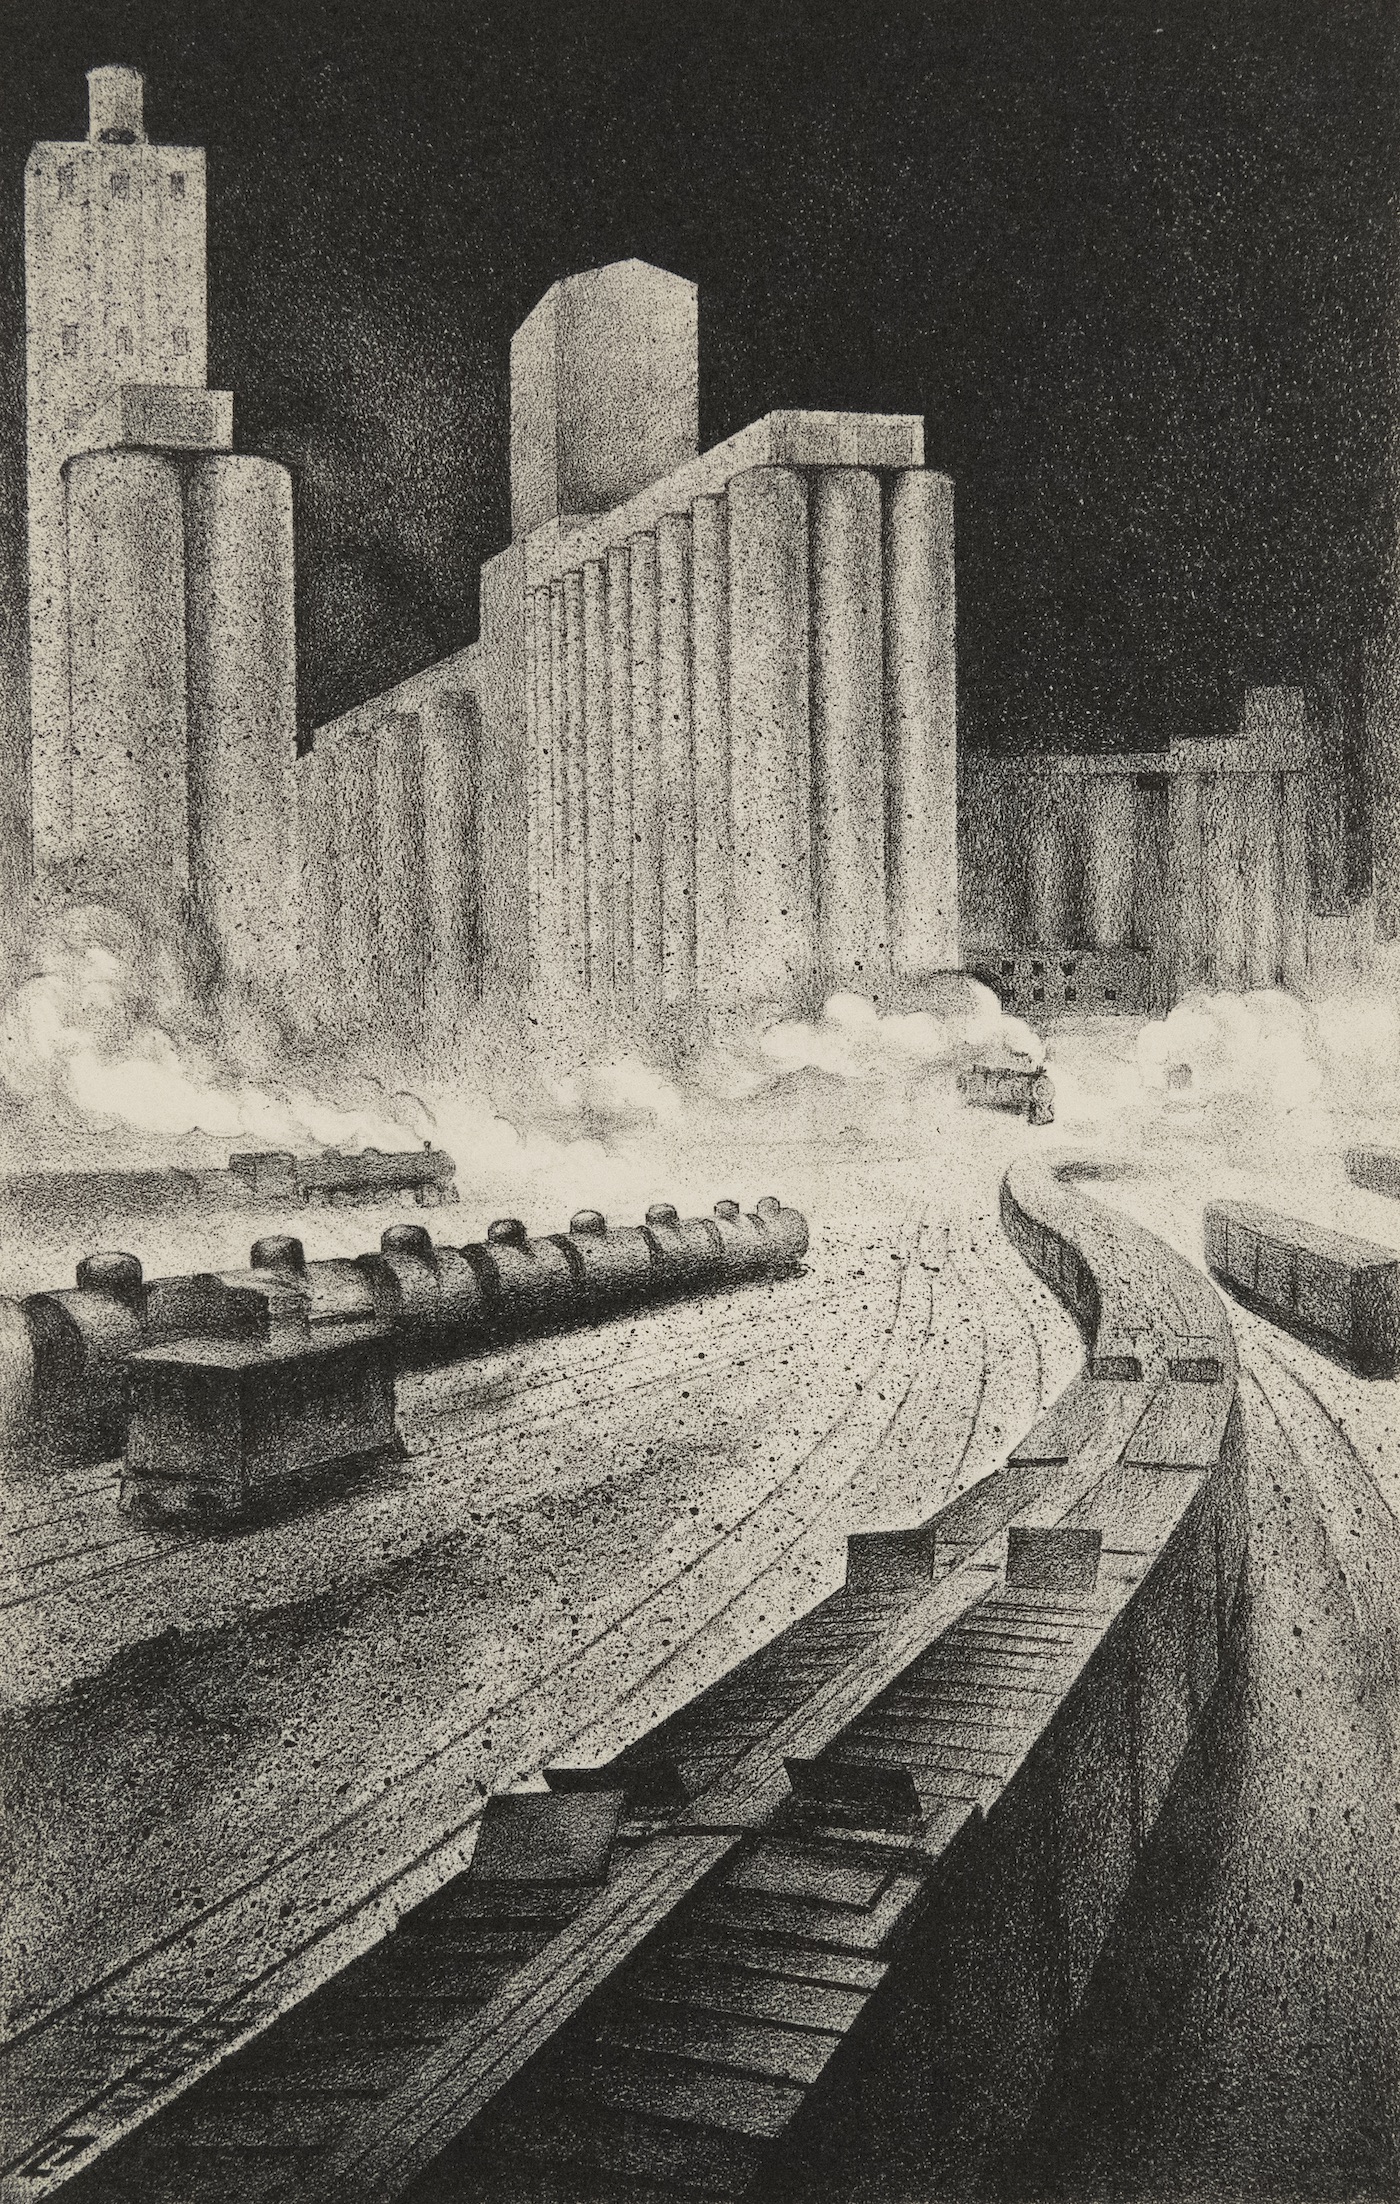 Trains varying in size and style and shades of gray move along tracks and spew white smoke in shades of gray. Cylindrical buildings scrape a black sky.